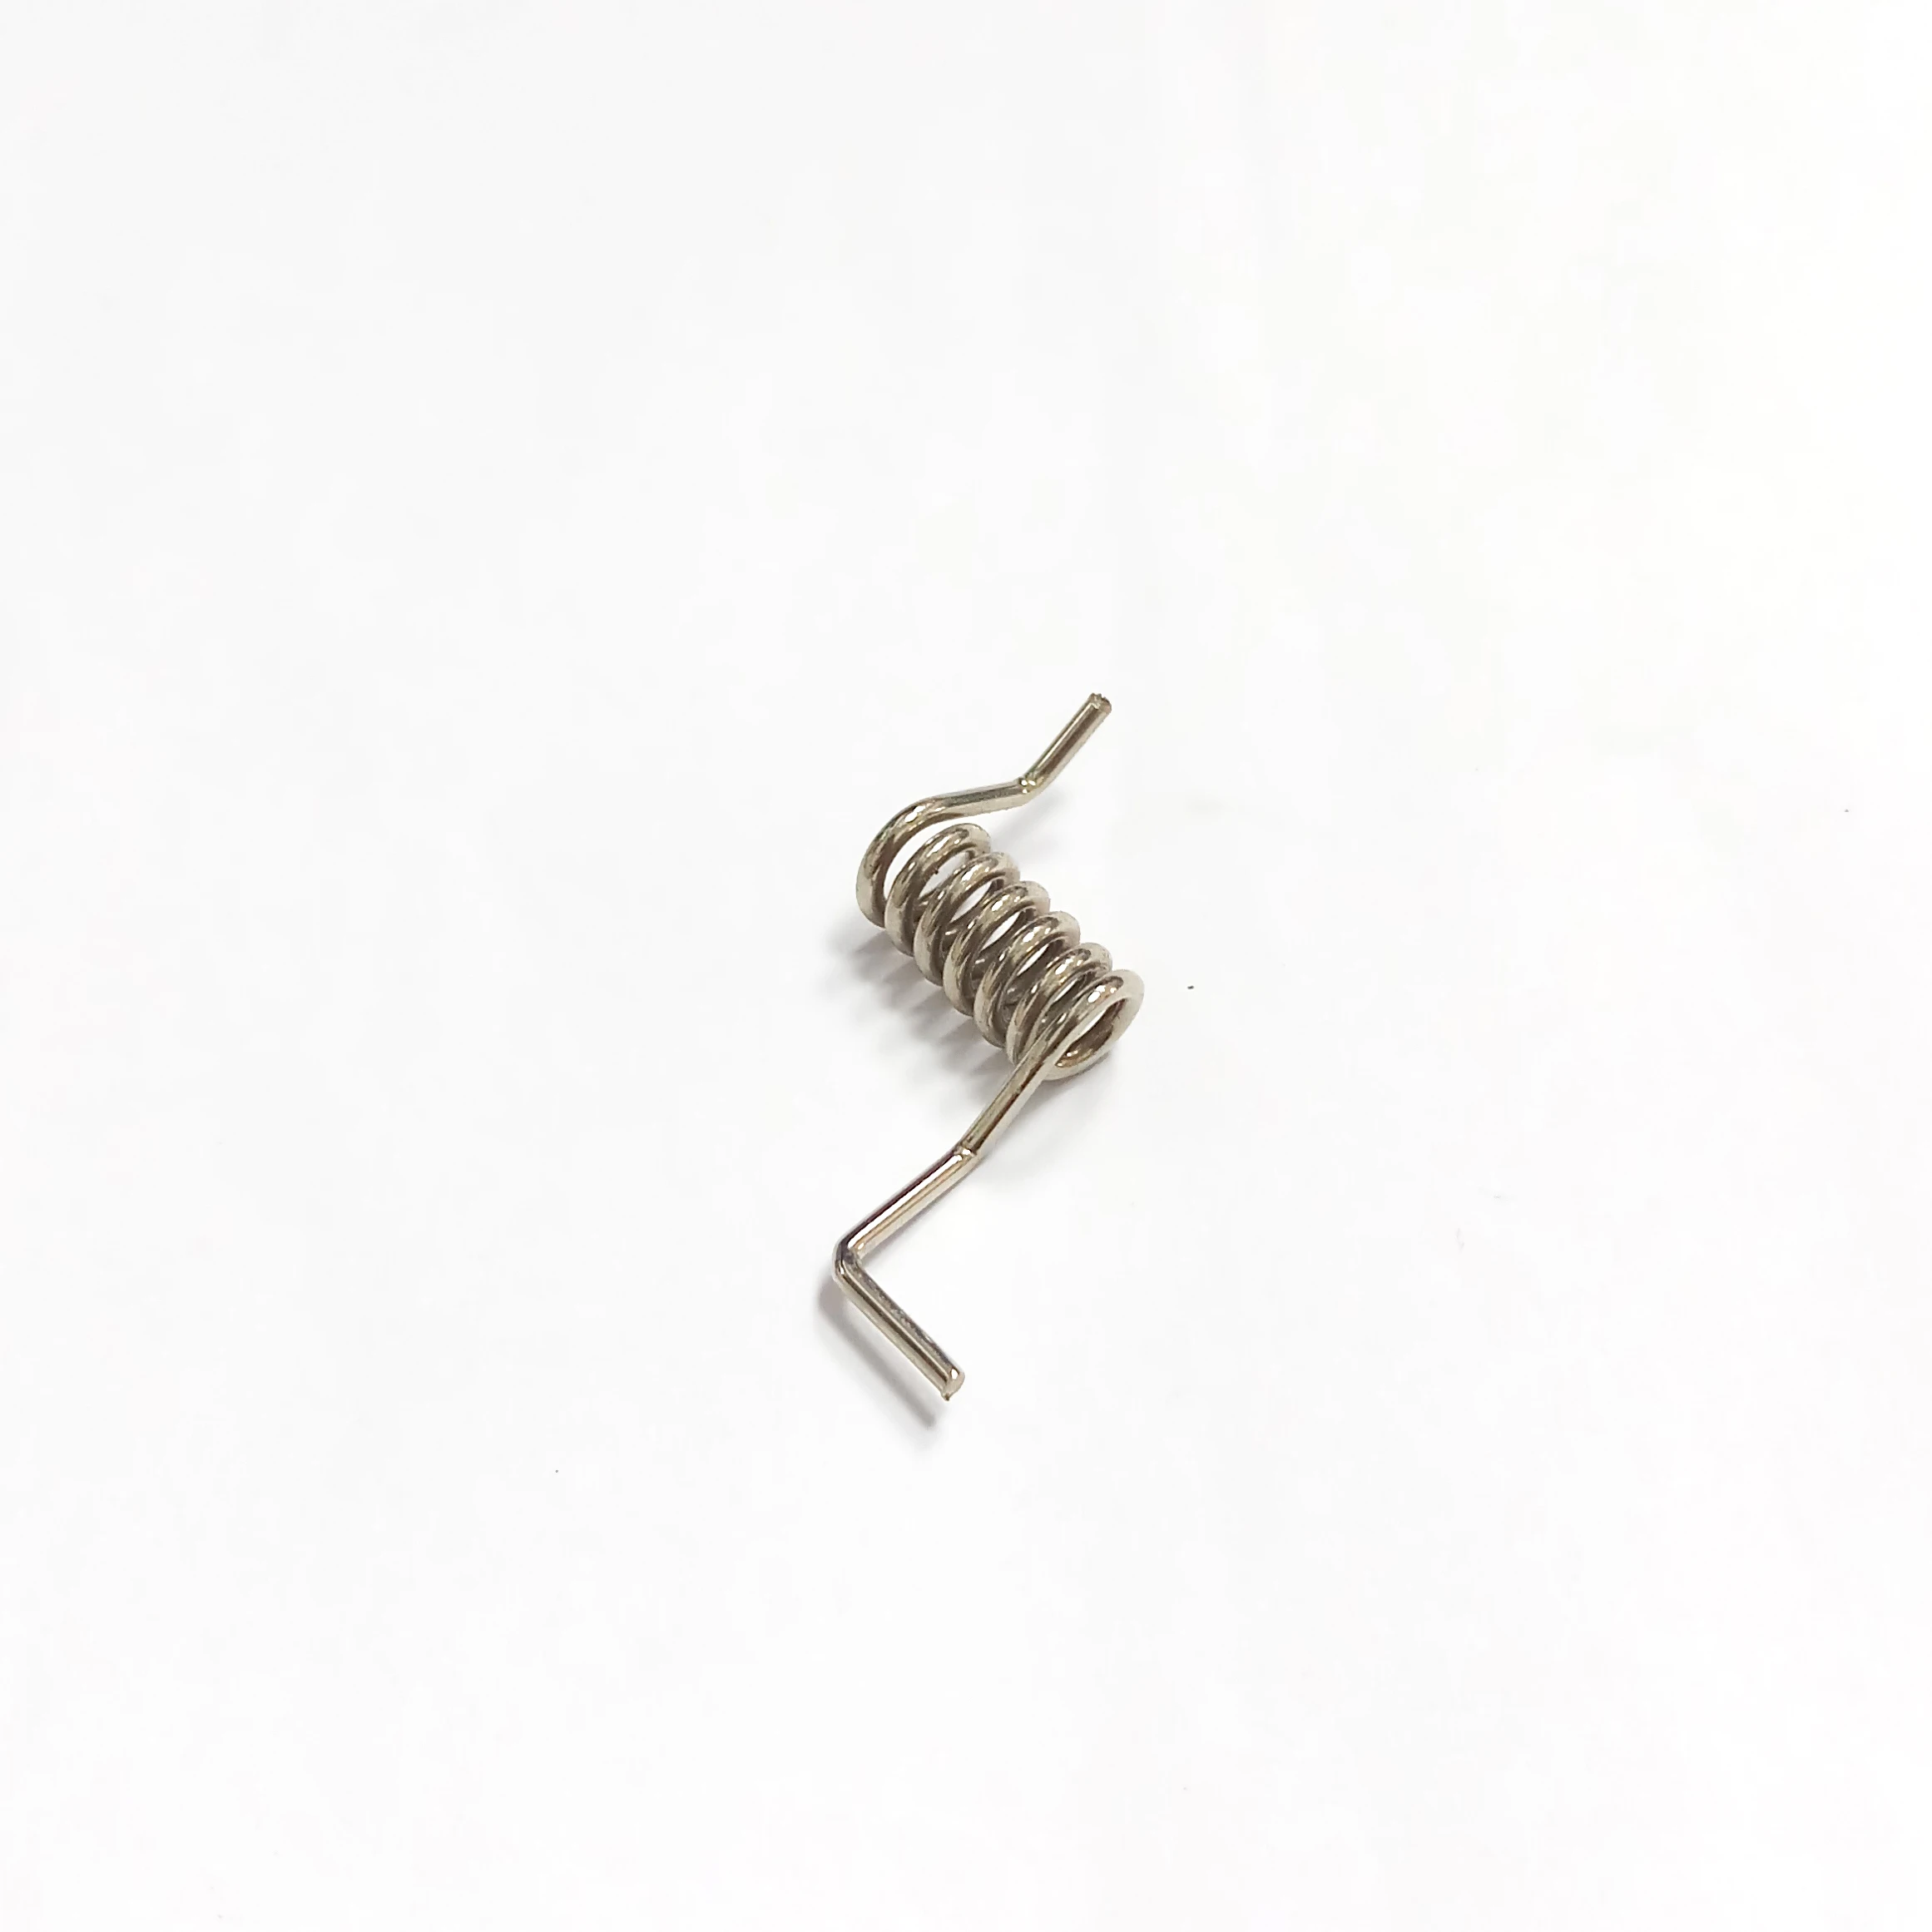 Factory custom OEM services cnc stainless steel wire forming bending springs